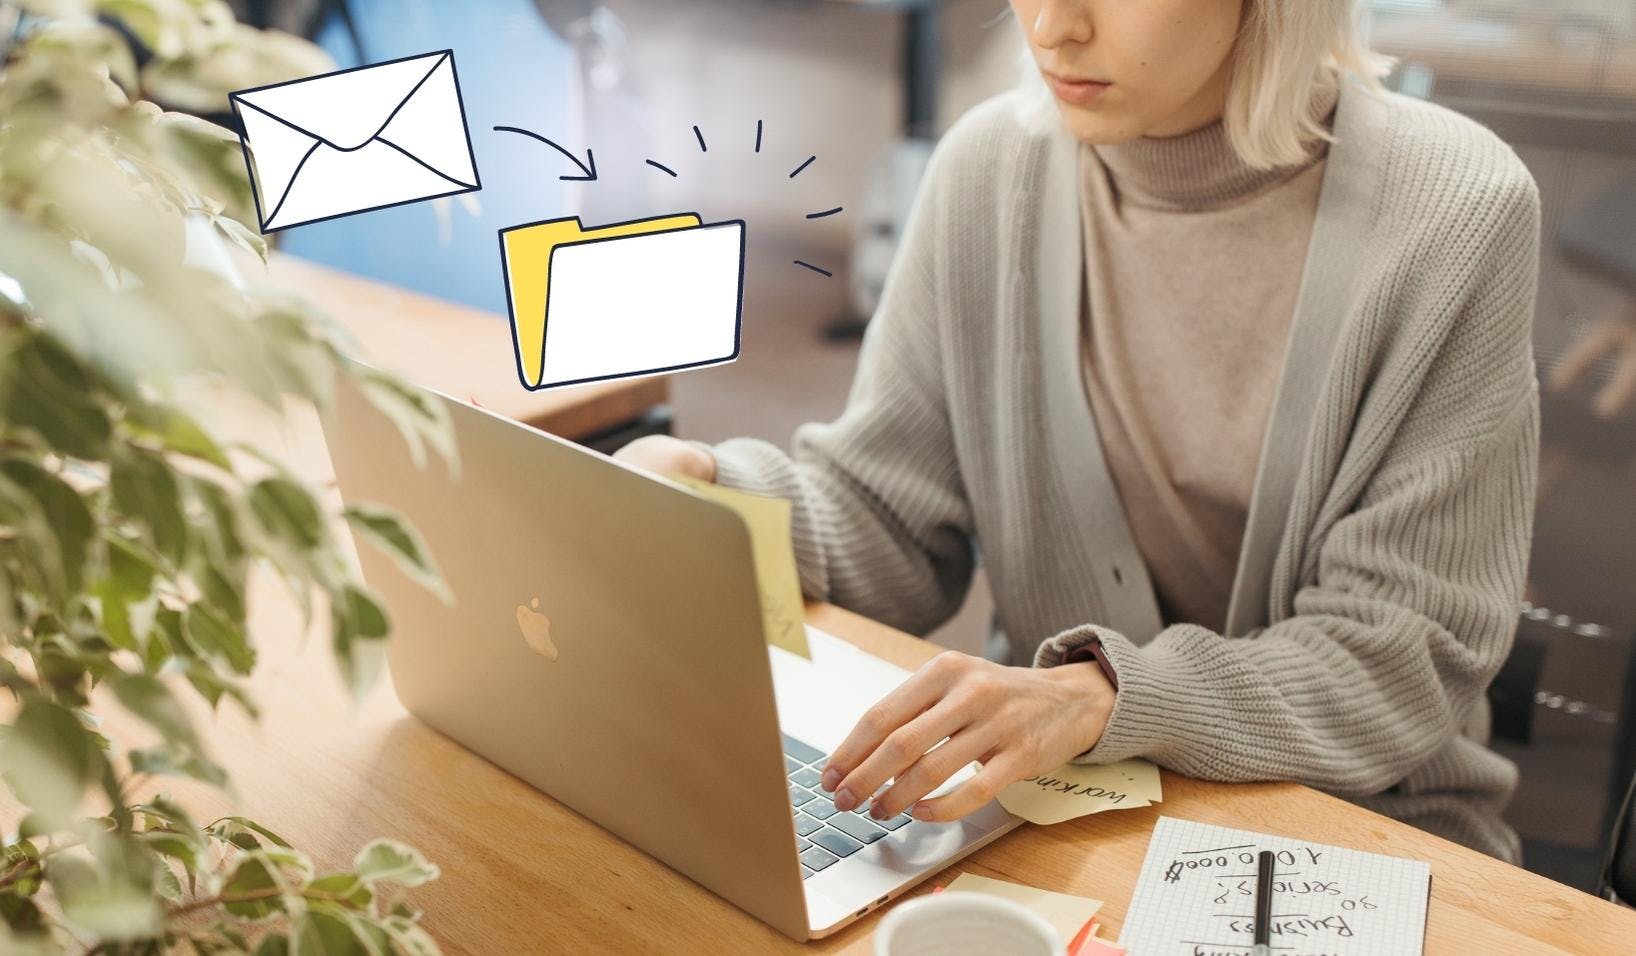 Blogpost image of a women behind her laptop with a note book and sticky notes being orgainized. There is a StartMail illustration of an envelope going into a folder that symbolised StartMail's filter feature.